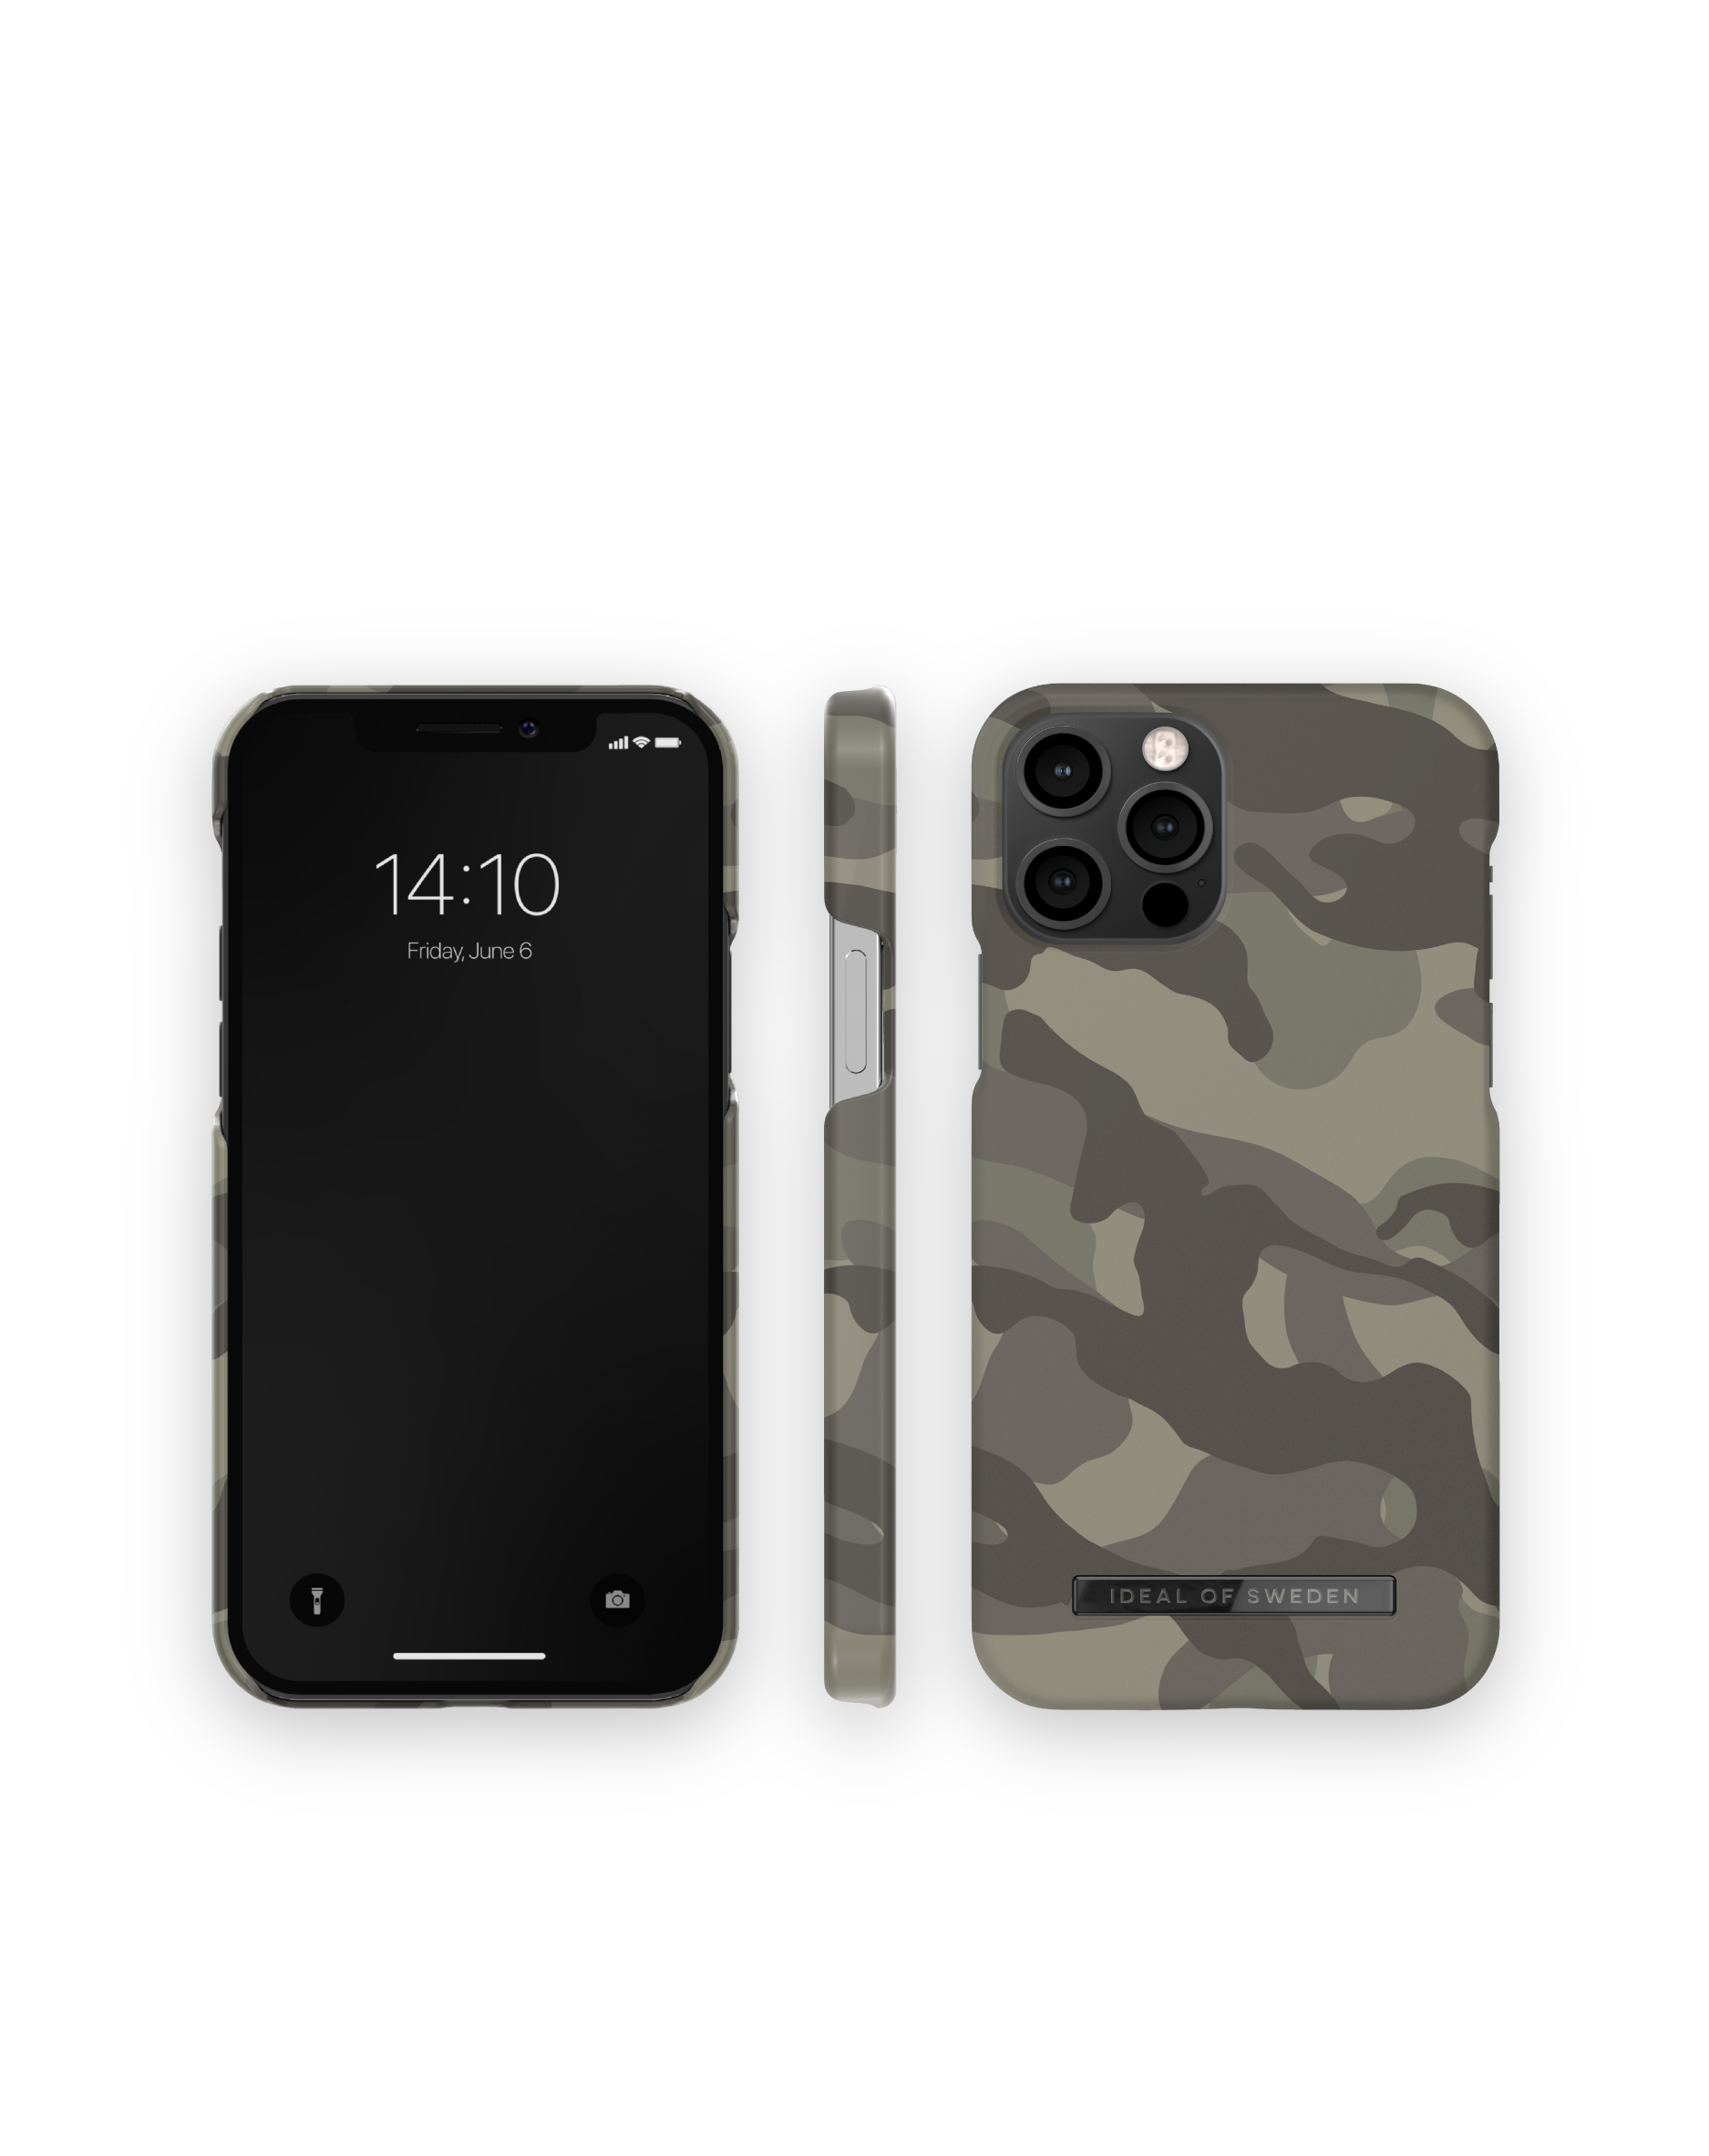 IDEAL OF SWEDEN Backcover, Pro, Apple, IDFCAW21-I2061-359, Matte 12/12 iPhone Camo